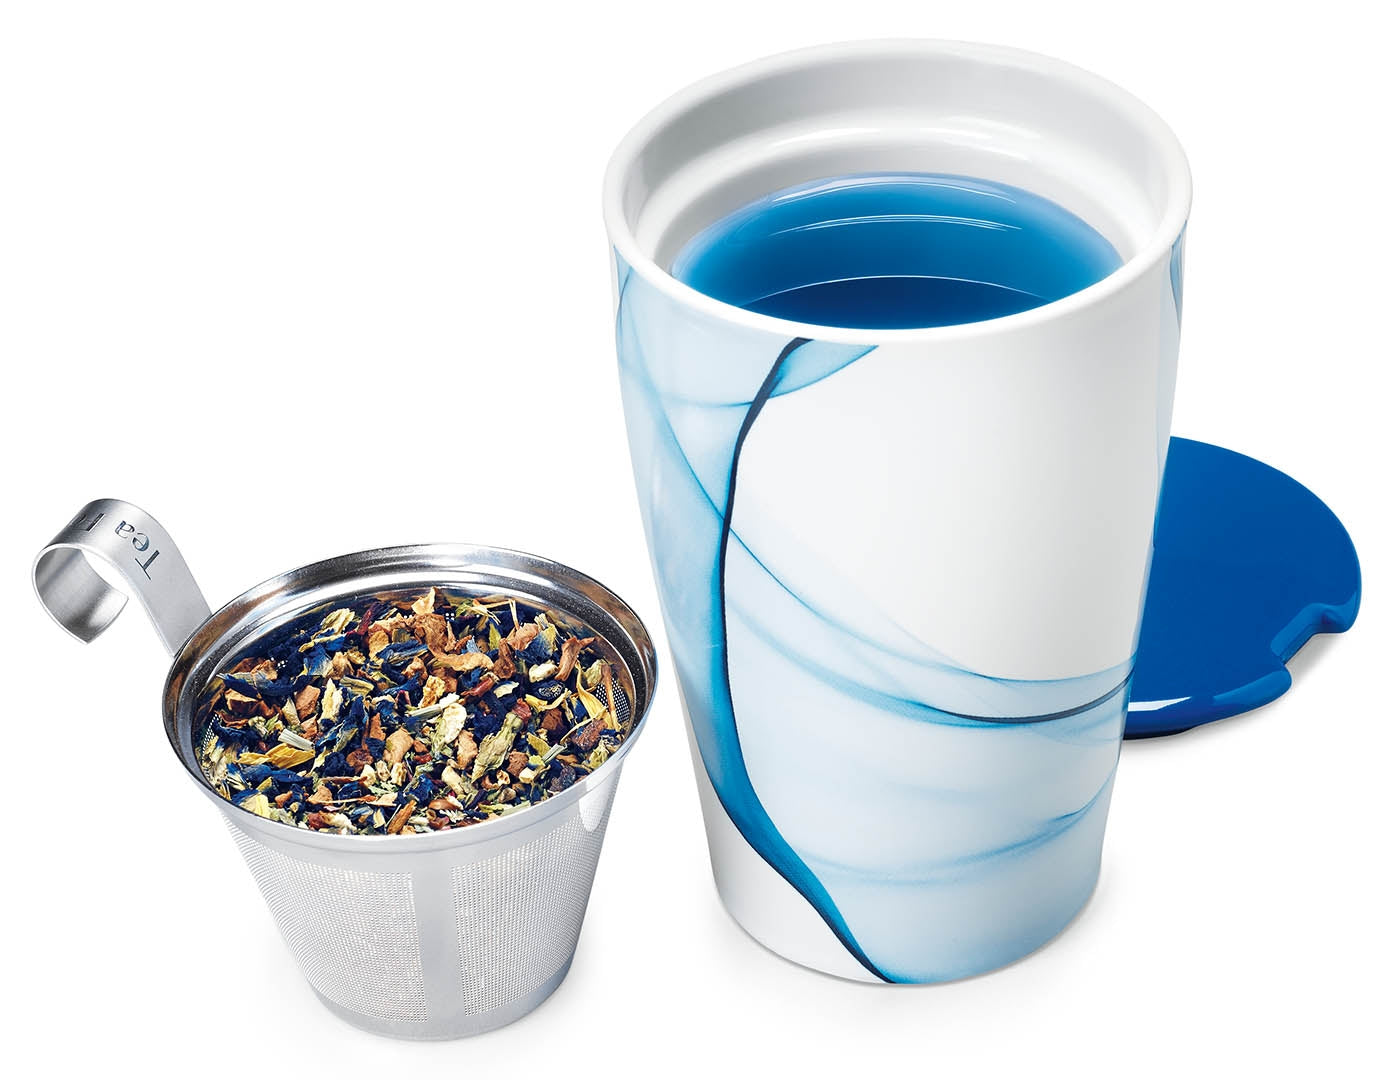 Bleu design KATI® Steeping cup with infuser showing stainless steel infuser with tea leaves